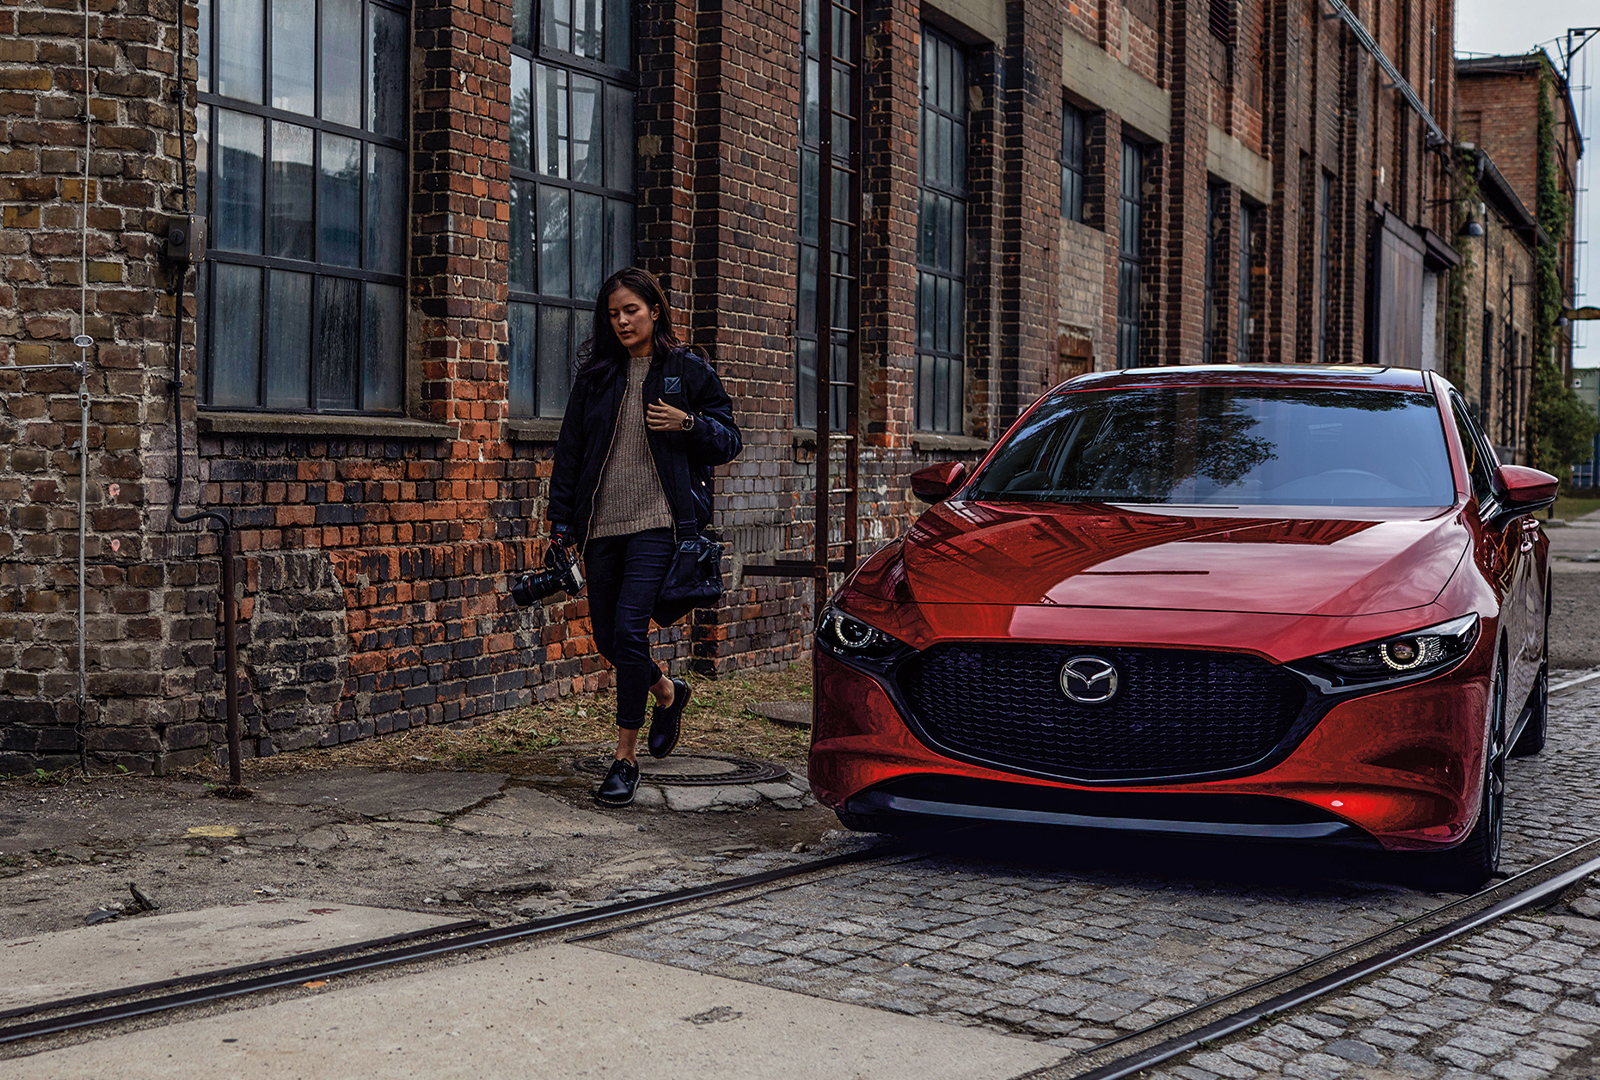 Woman walking alongside red Mazda3 parked on cobblestone next to red-brick warehouse.